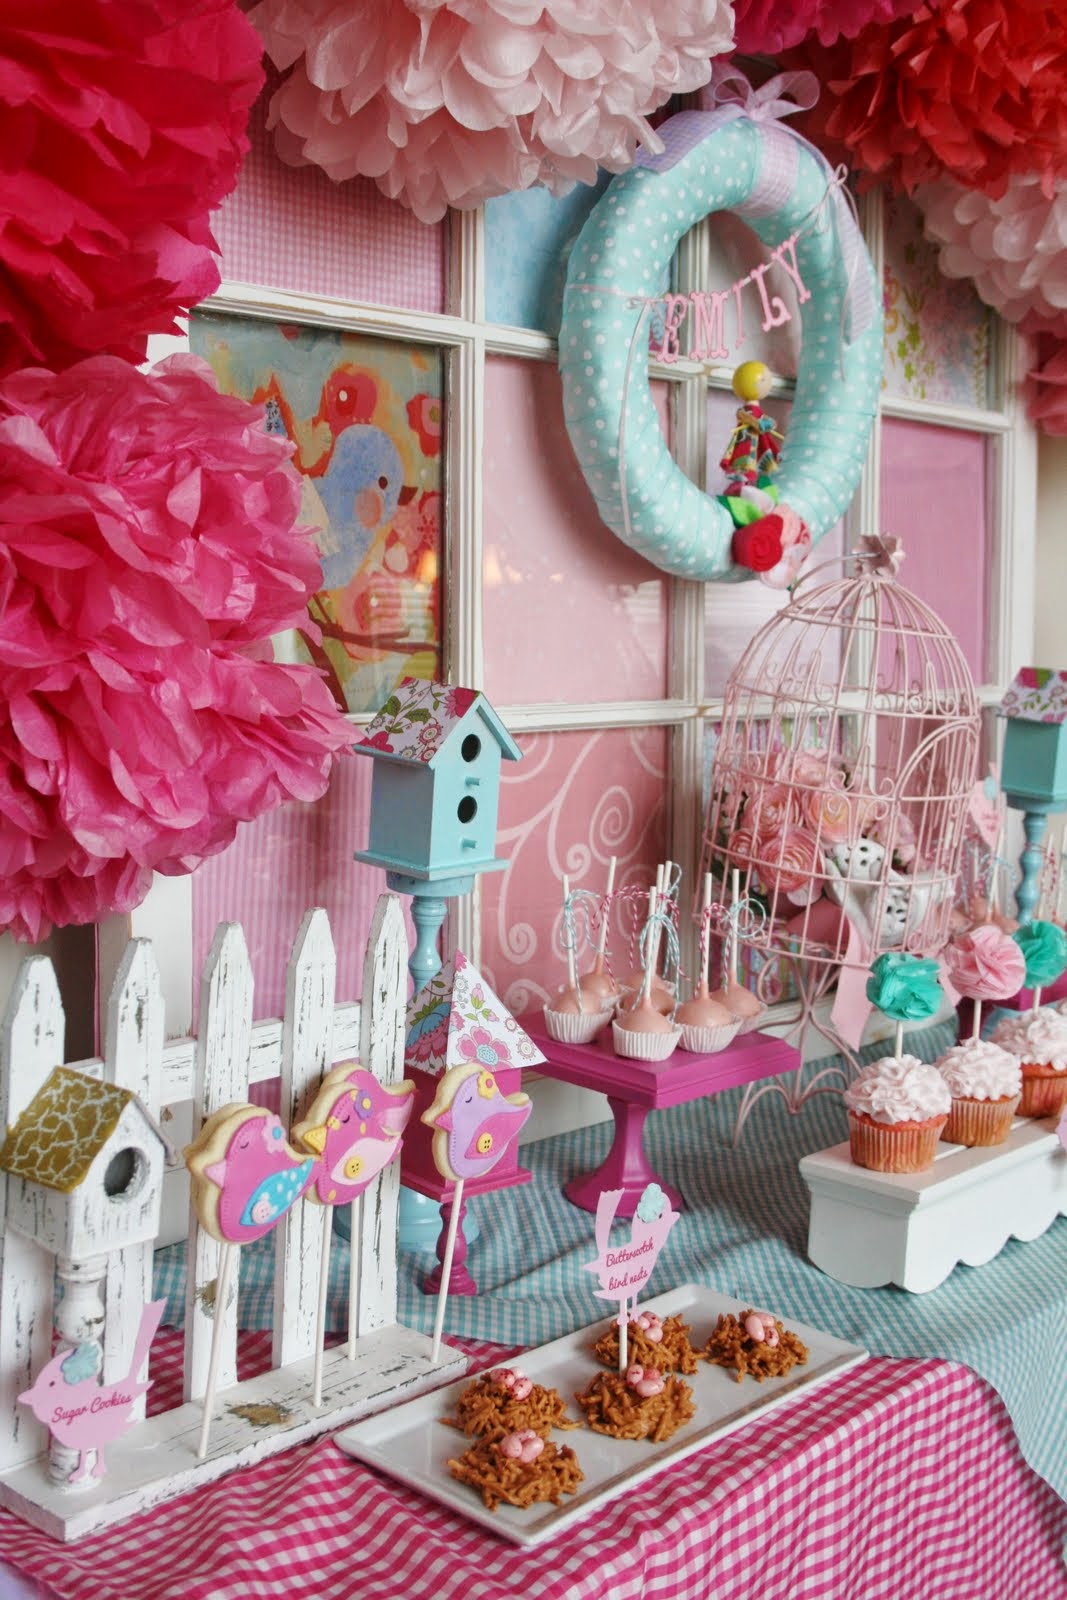 All About Women's Things: Baby Shower Decorating Ideas For ...